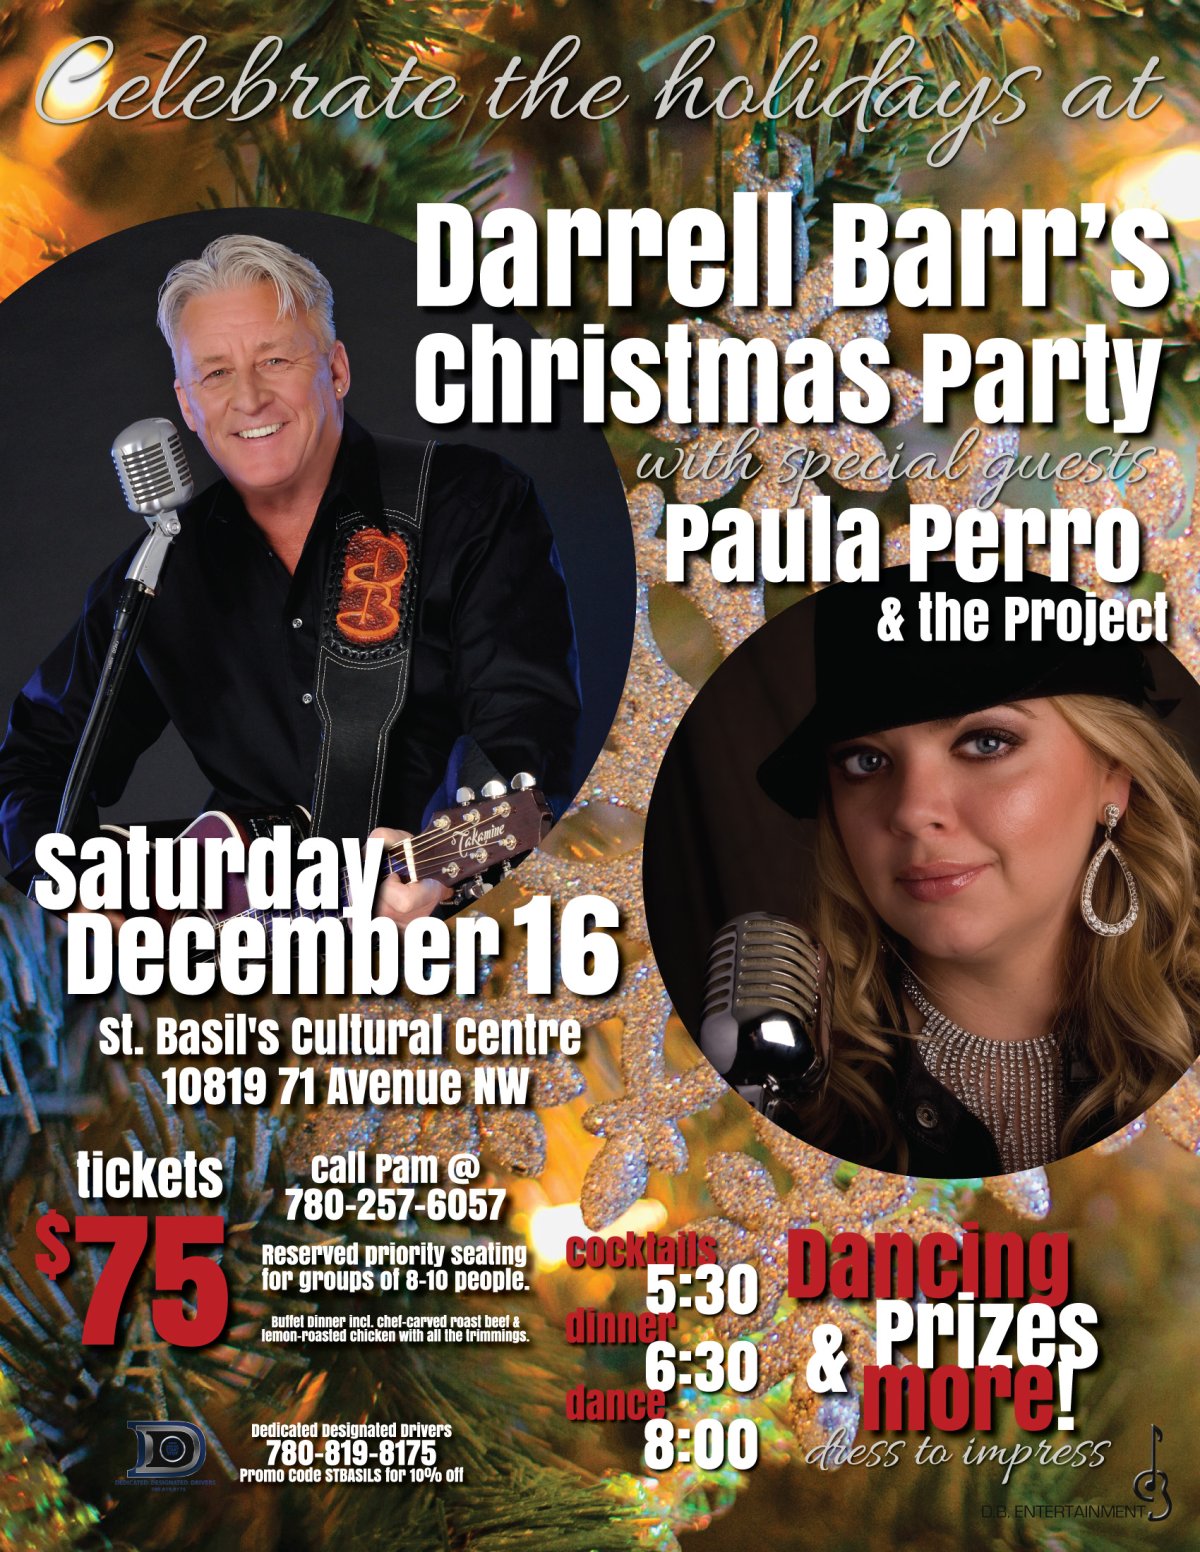 Darrell Barr’s Christmas Party - image